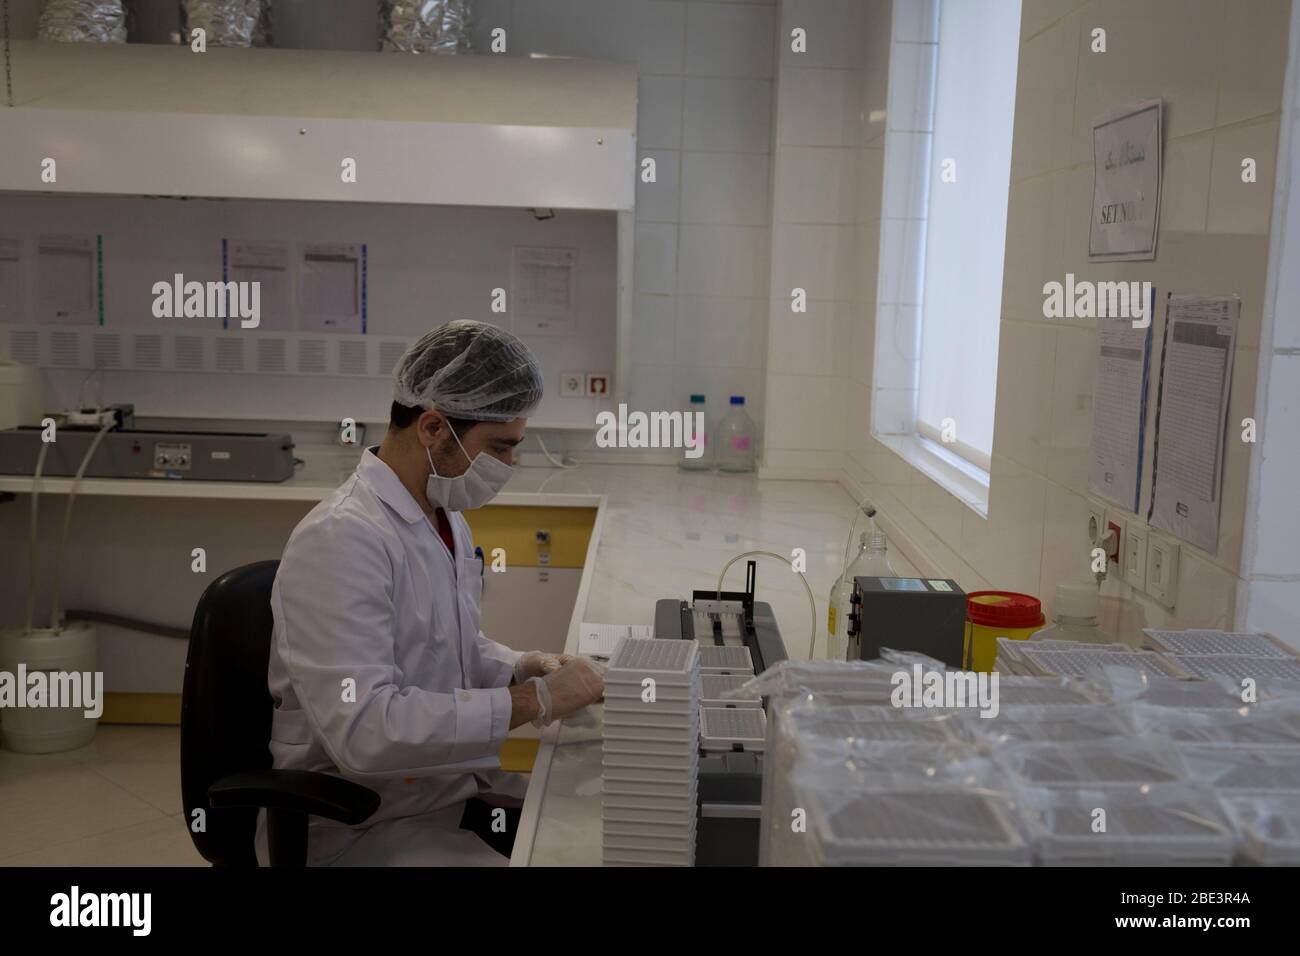 Karaj, Alborz, Iran. 11th Apr, 2020. Iranian medical staff work on the production of COVID-19 test kits at the Pishtaz-Teb knowledge-based medical company just outside the city of Karaj, in the northern Alborz Province. Iran launched the production line of serology-based test kits that can discover whether a person has ever been exposed to the novel coronavirus or suffered from the COVID-19 disease and recovered or not. Iran is one of the most affected by pandemic COVID-19 disease caused by the SARS-CoV-2 coronavirus. Credit: Rouzbeh Fouladi/ZUMA Wire/Alamy Live News Stock Photo